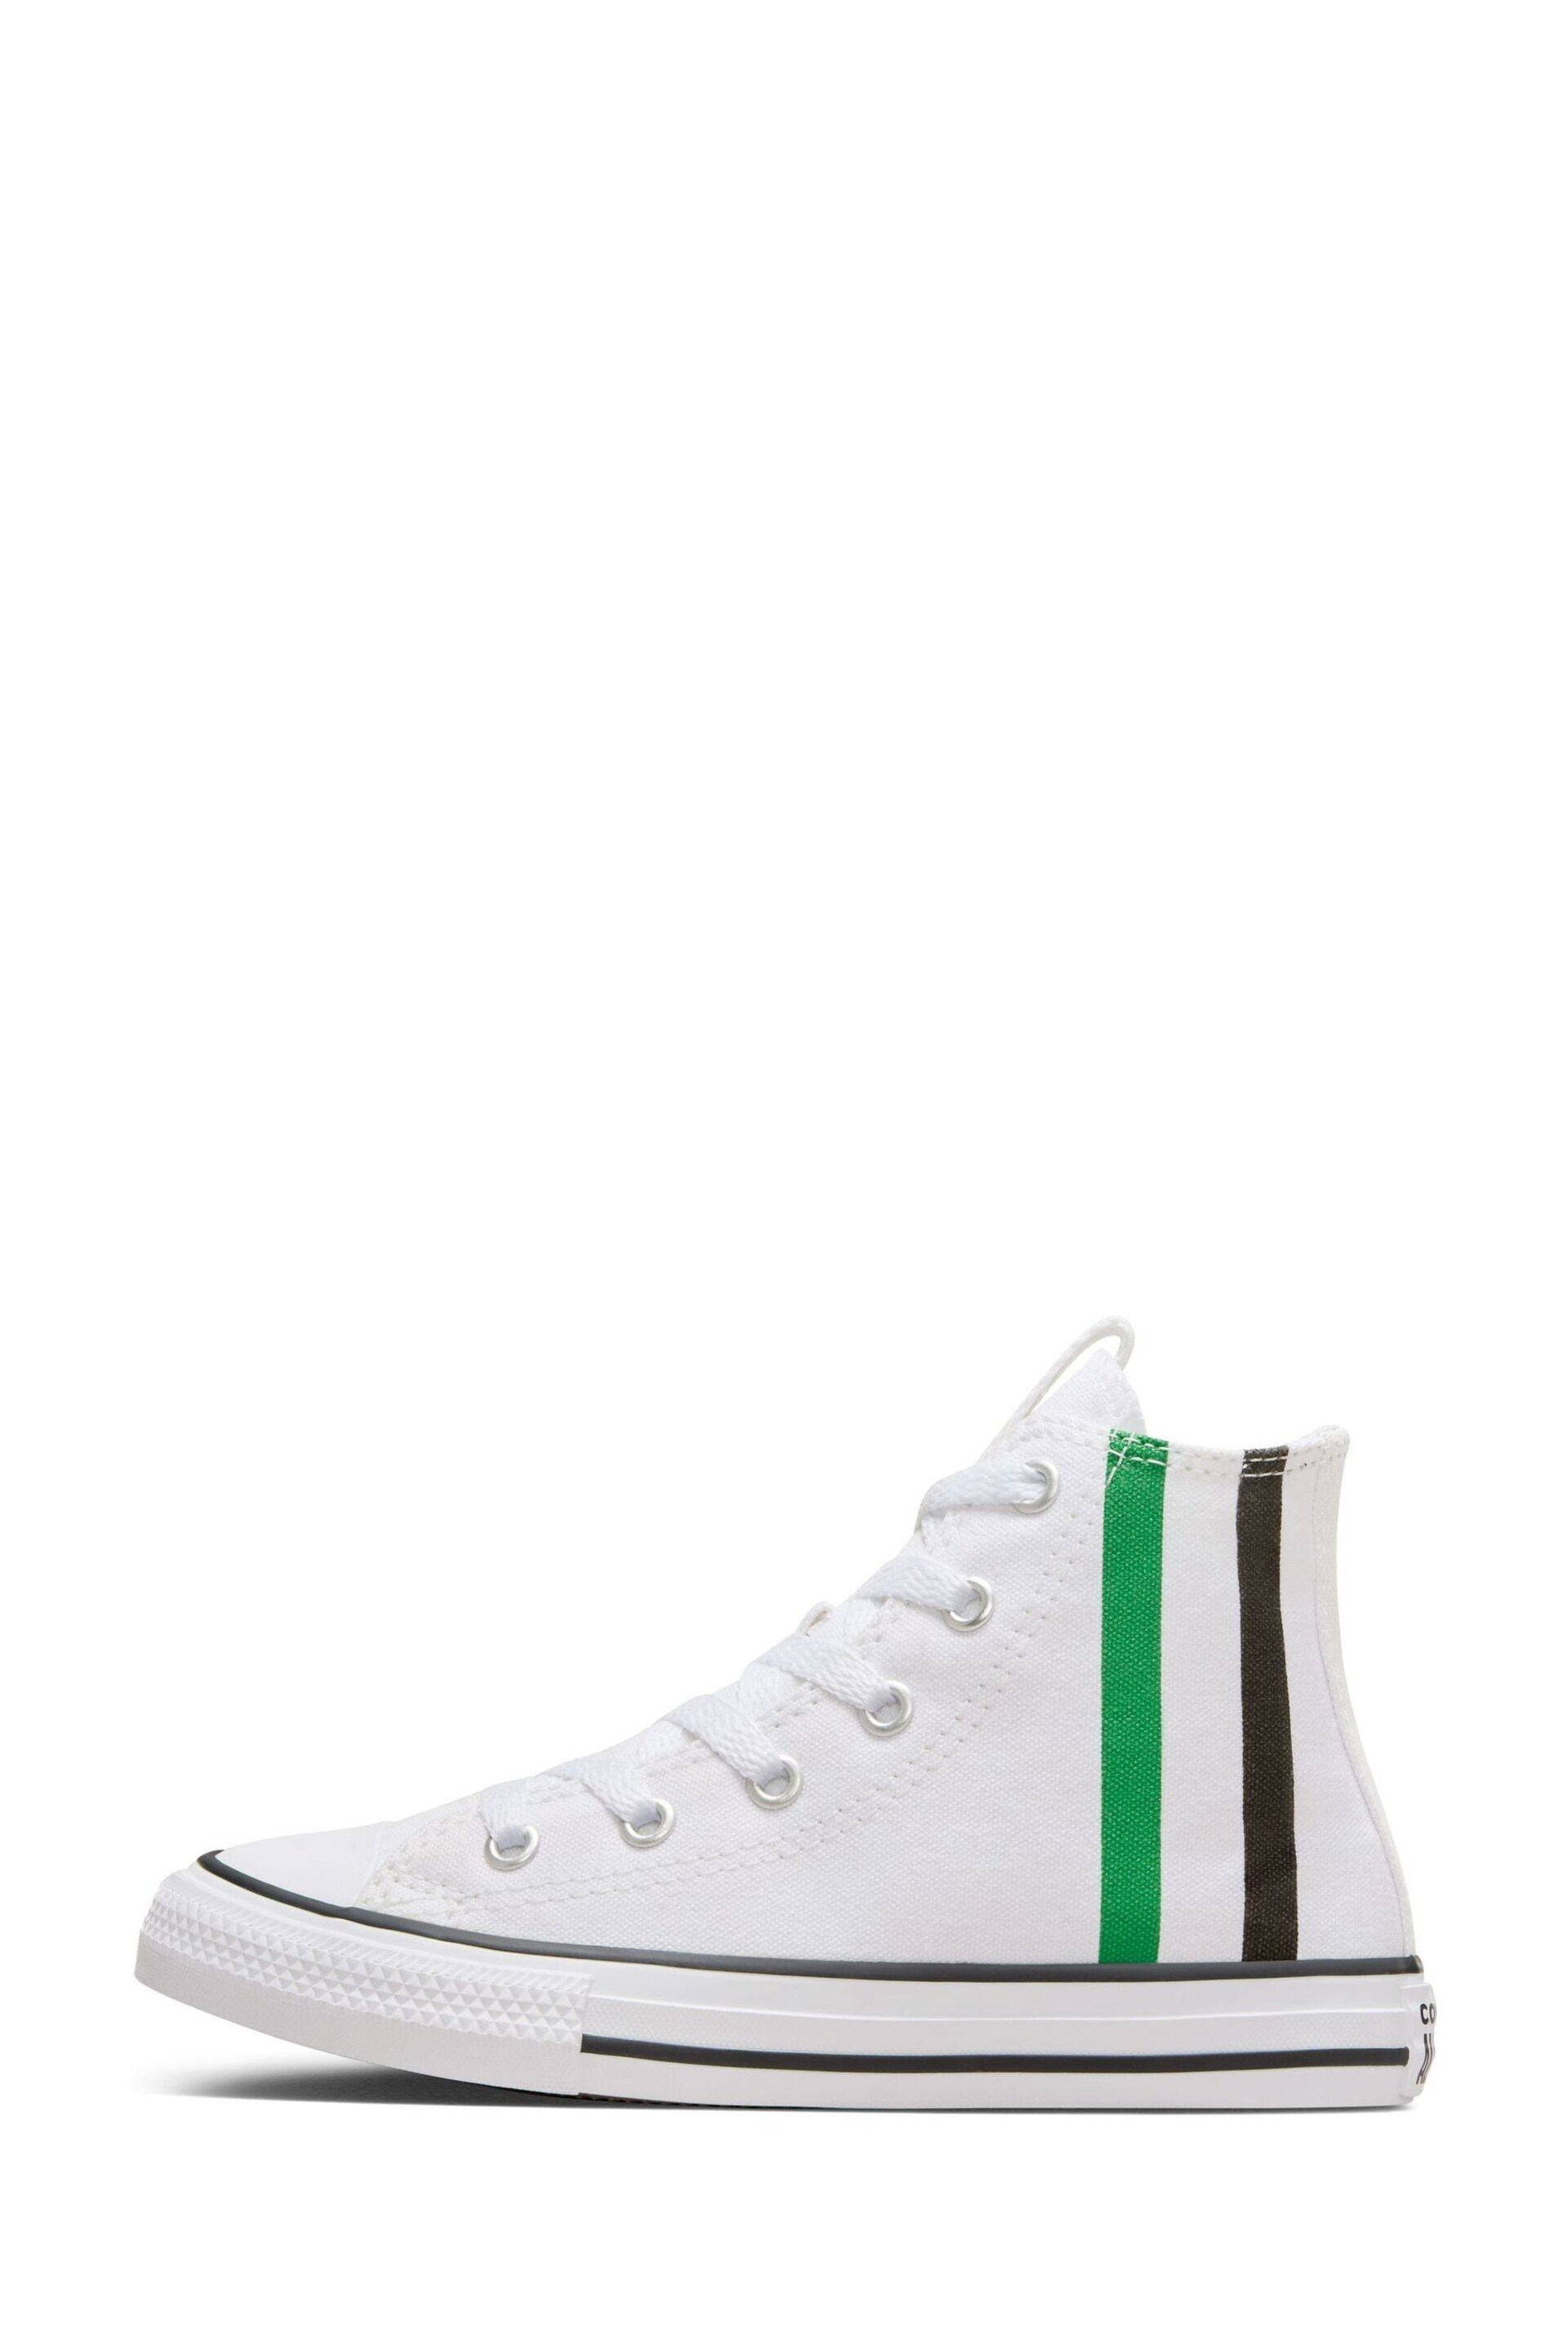 Converse Green Junior Chuck Taylor All Star Trainers - Image 10 of 11